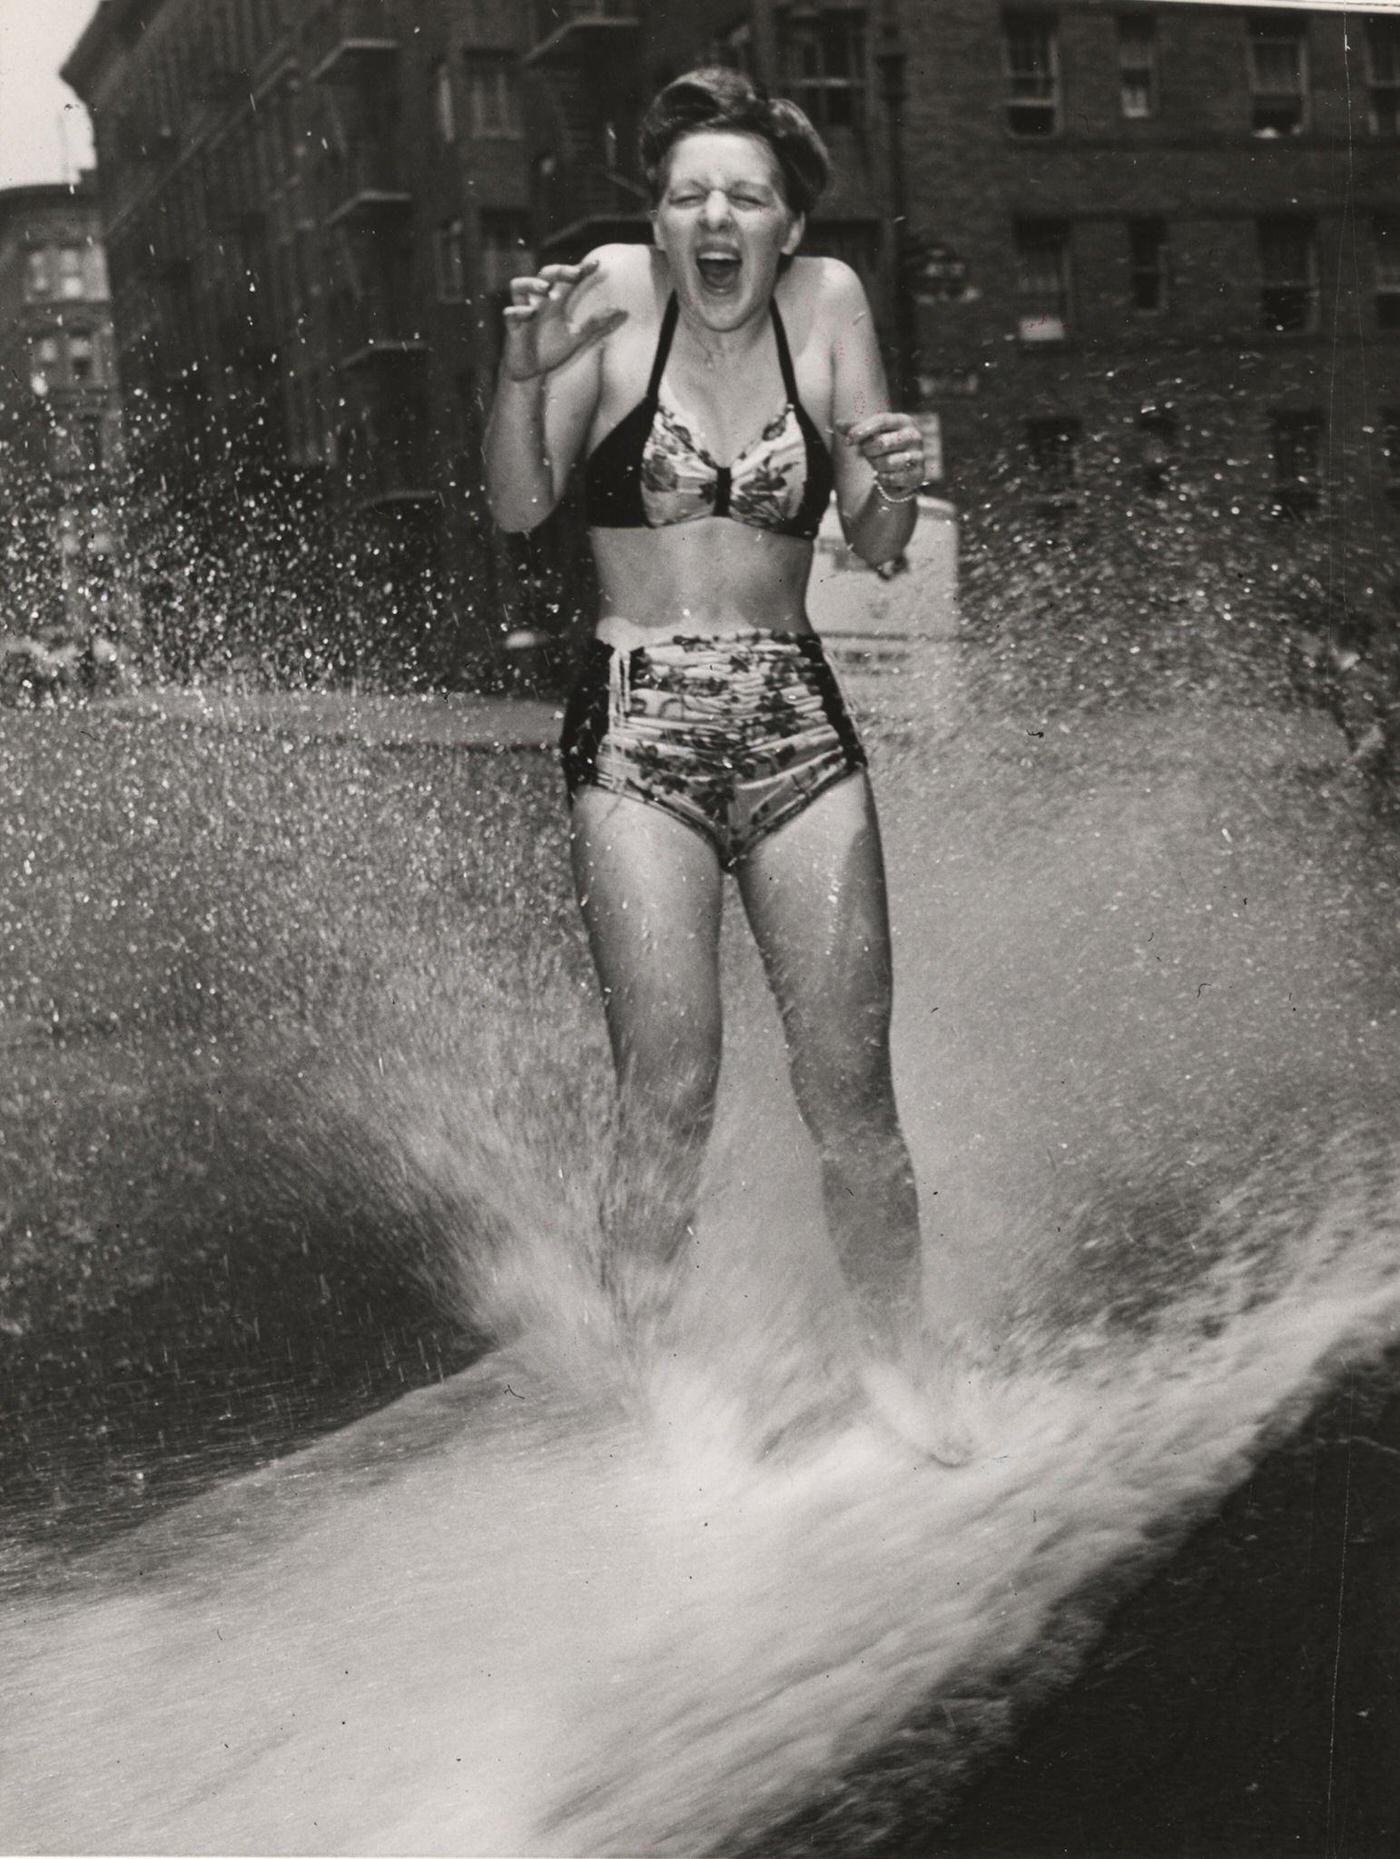 Woman in a two-piece bathing suit cools down under a fire hydrant spray, 1930s